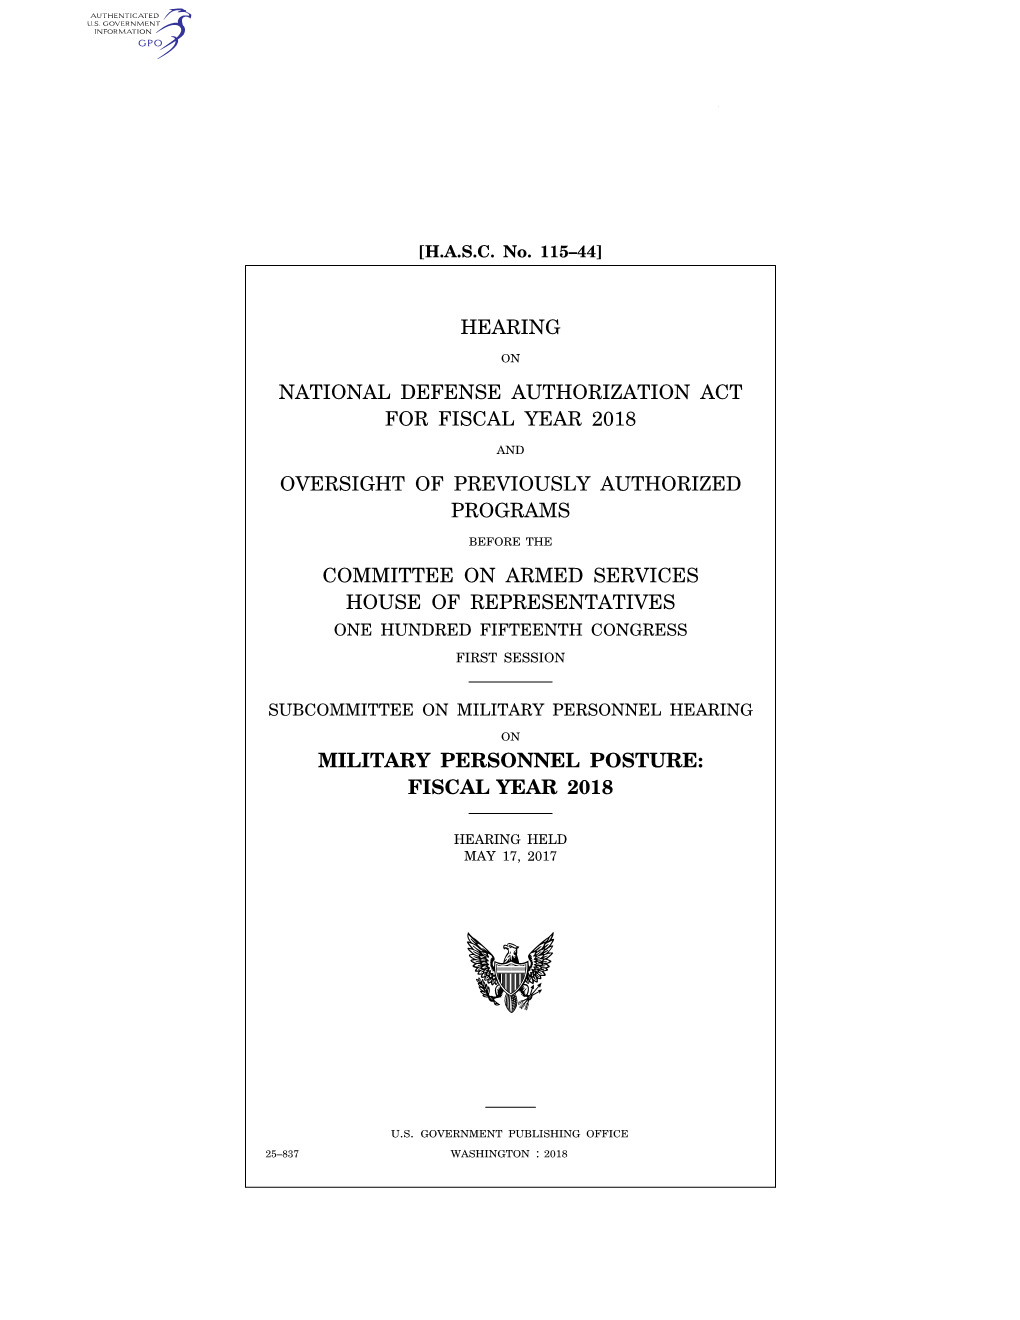 Hearing National Defense Authorization Act For